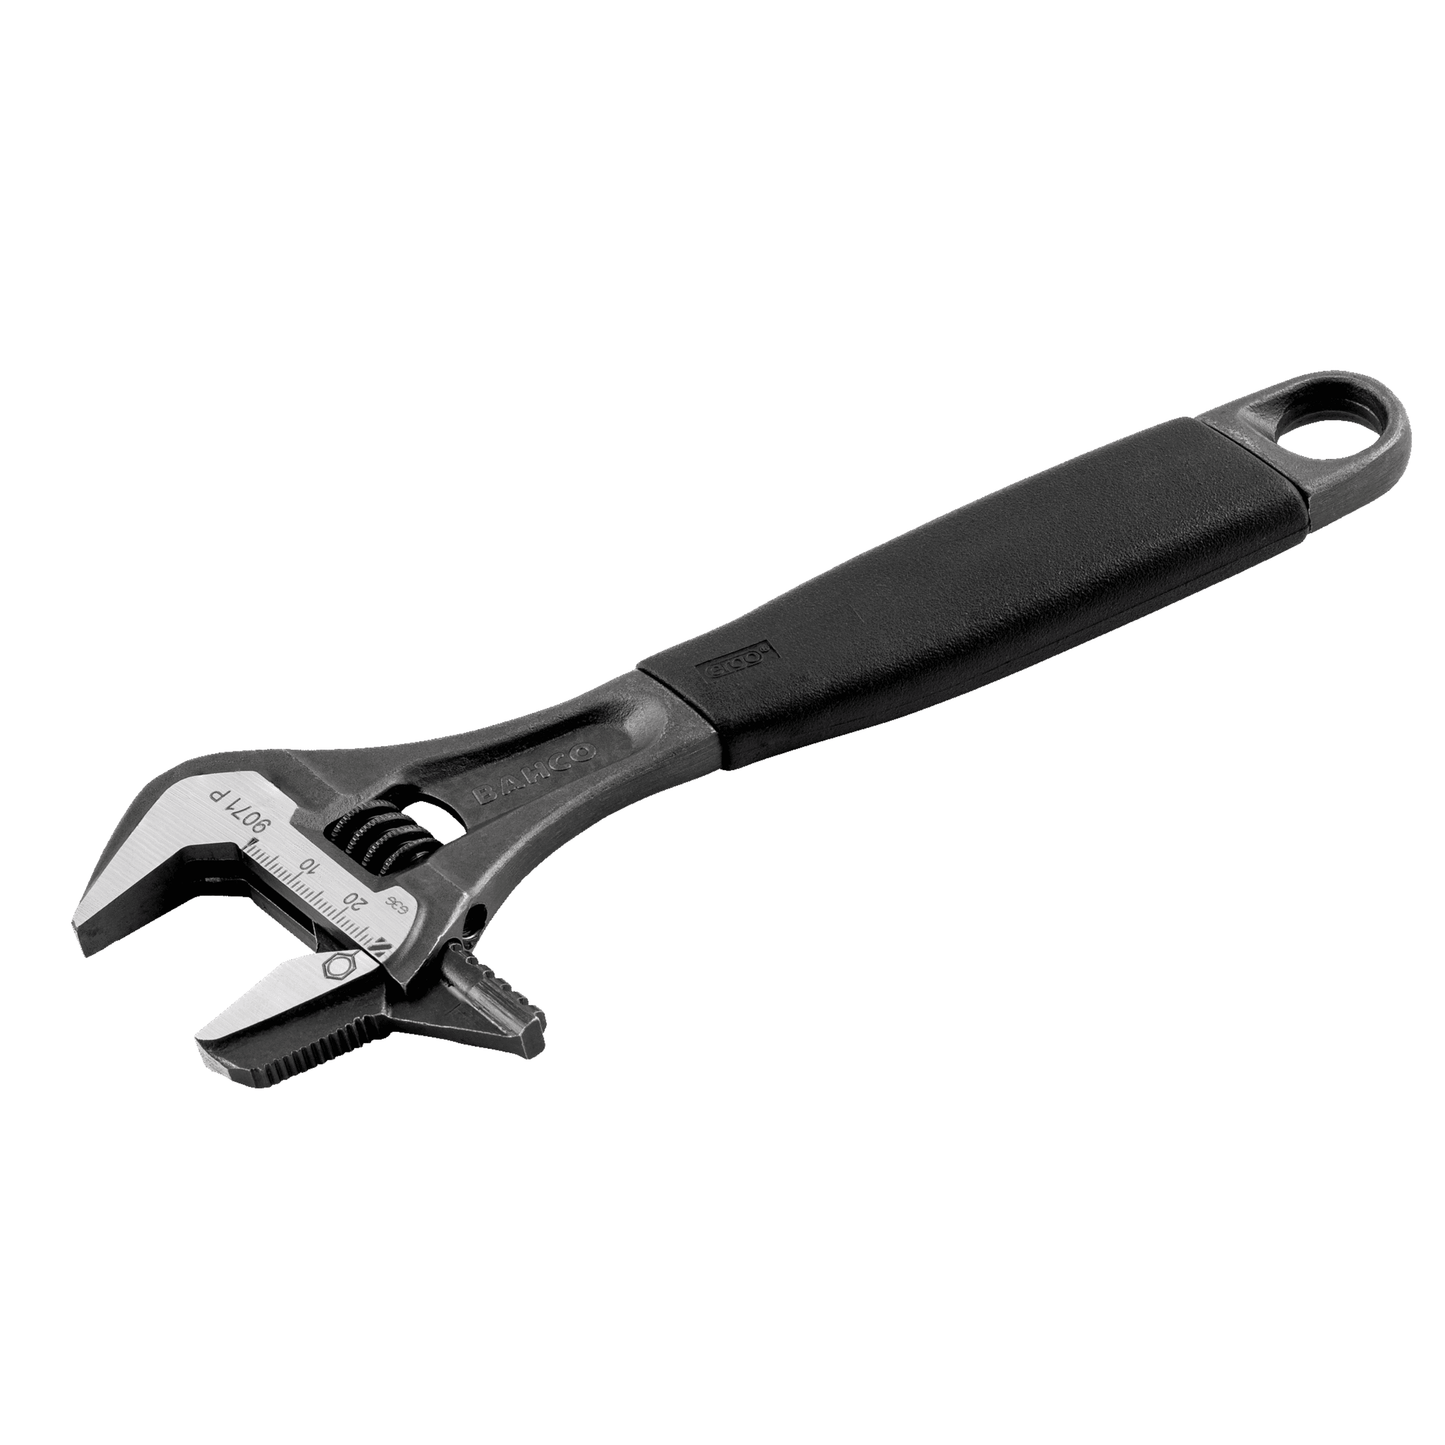 Bahco 10" SAE Ergo™ Combination Adjustable/Pipe Wrench